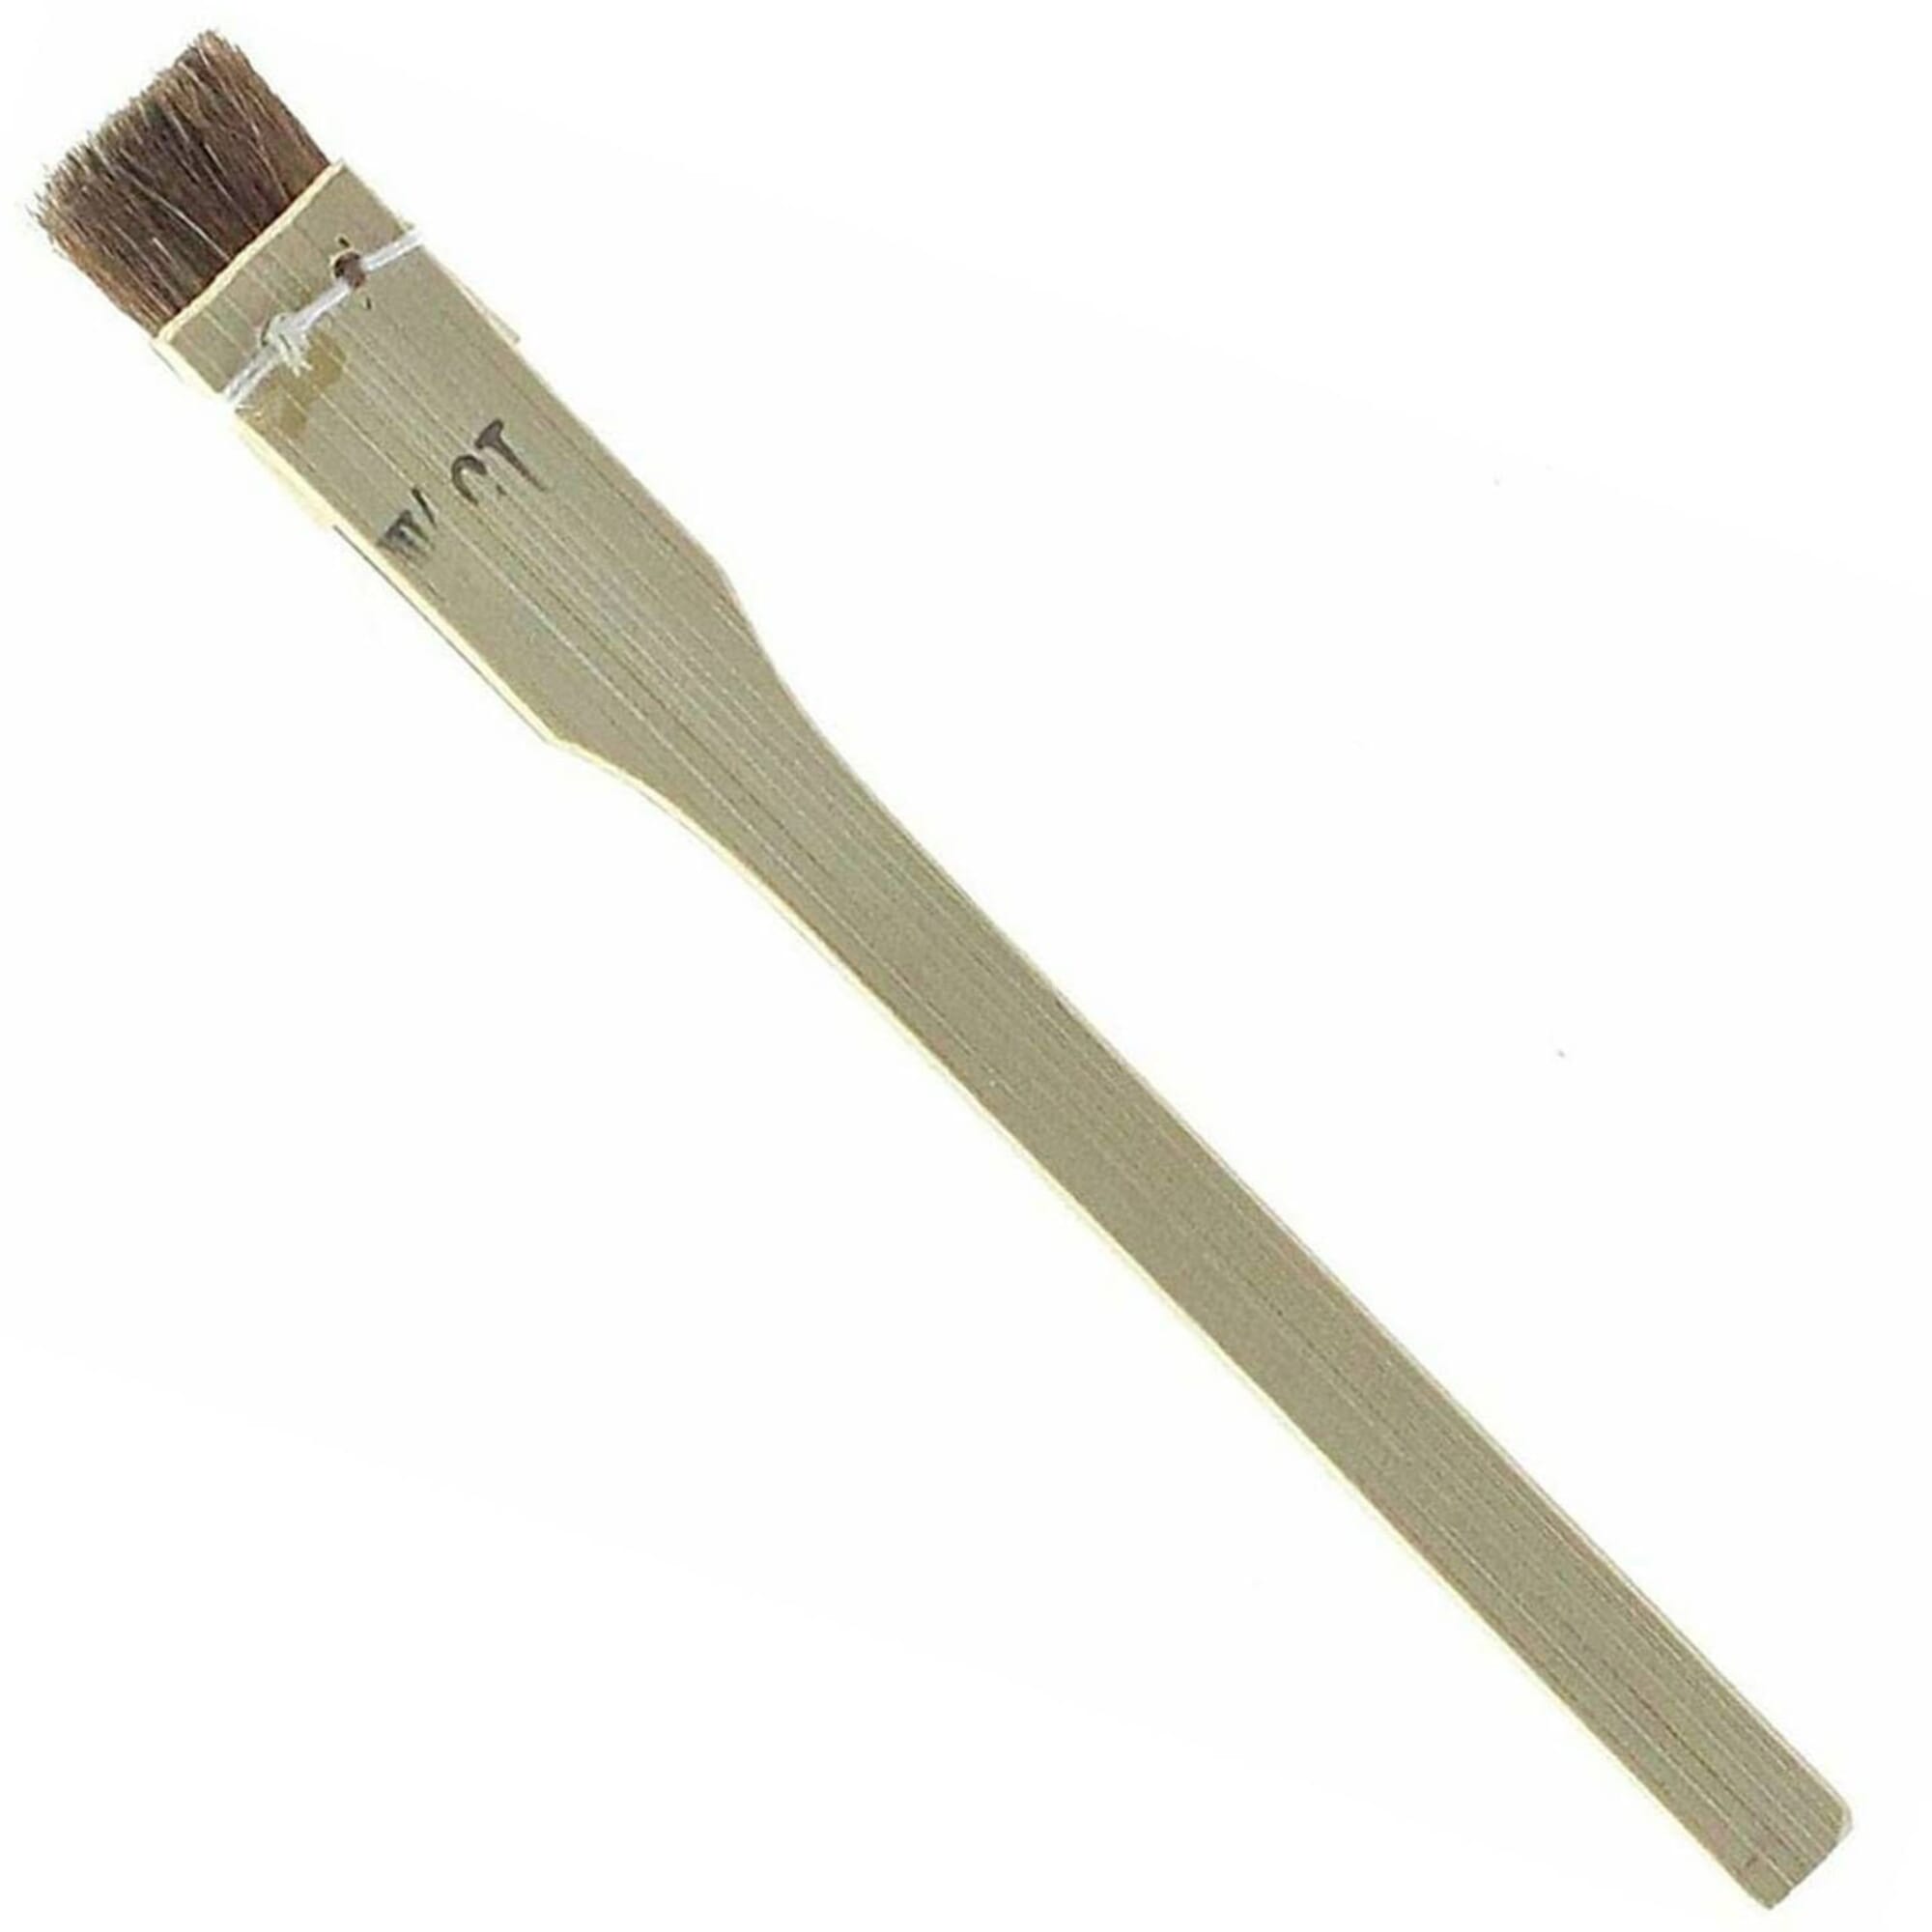 Big Stencil Brush for Stenciling Allover Patterns & Waxing Chalk Paint